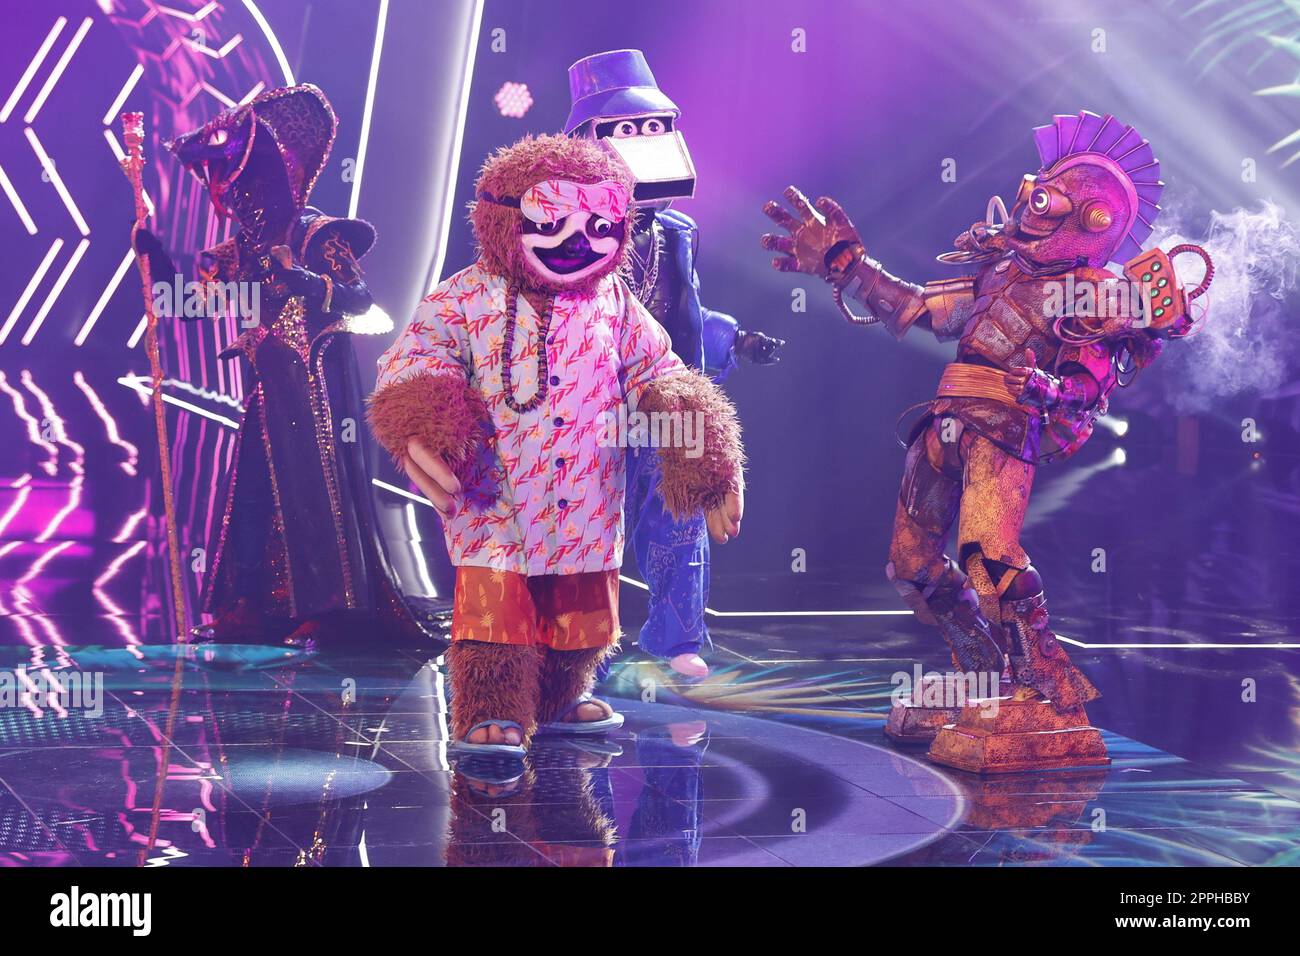 The Black Mamba,The Sloth - Tom Beck,The Pipe - Thomas Hayo,Rosty,The Masked Singer saison 7 Episode 3,MMC Studios,Cologne,15.10.2022 Banque D'Images